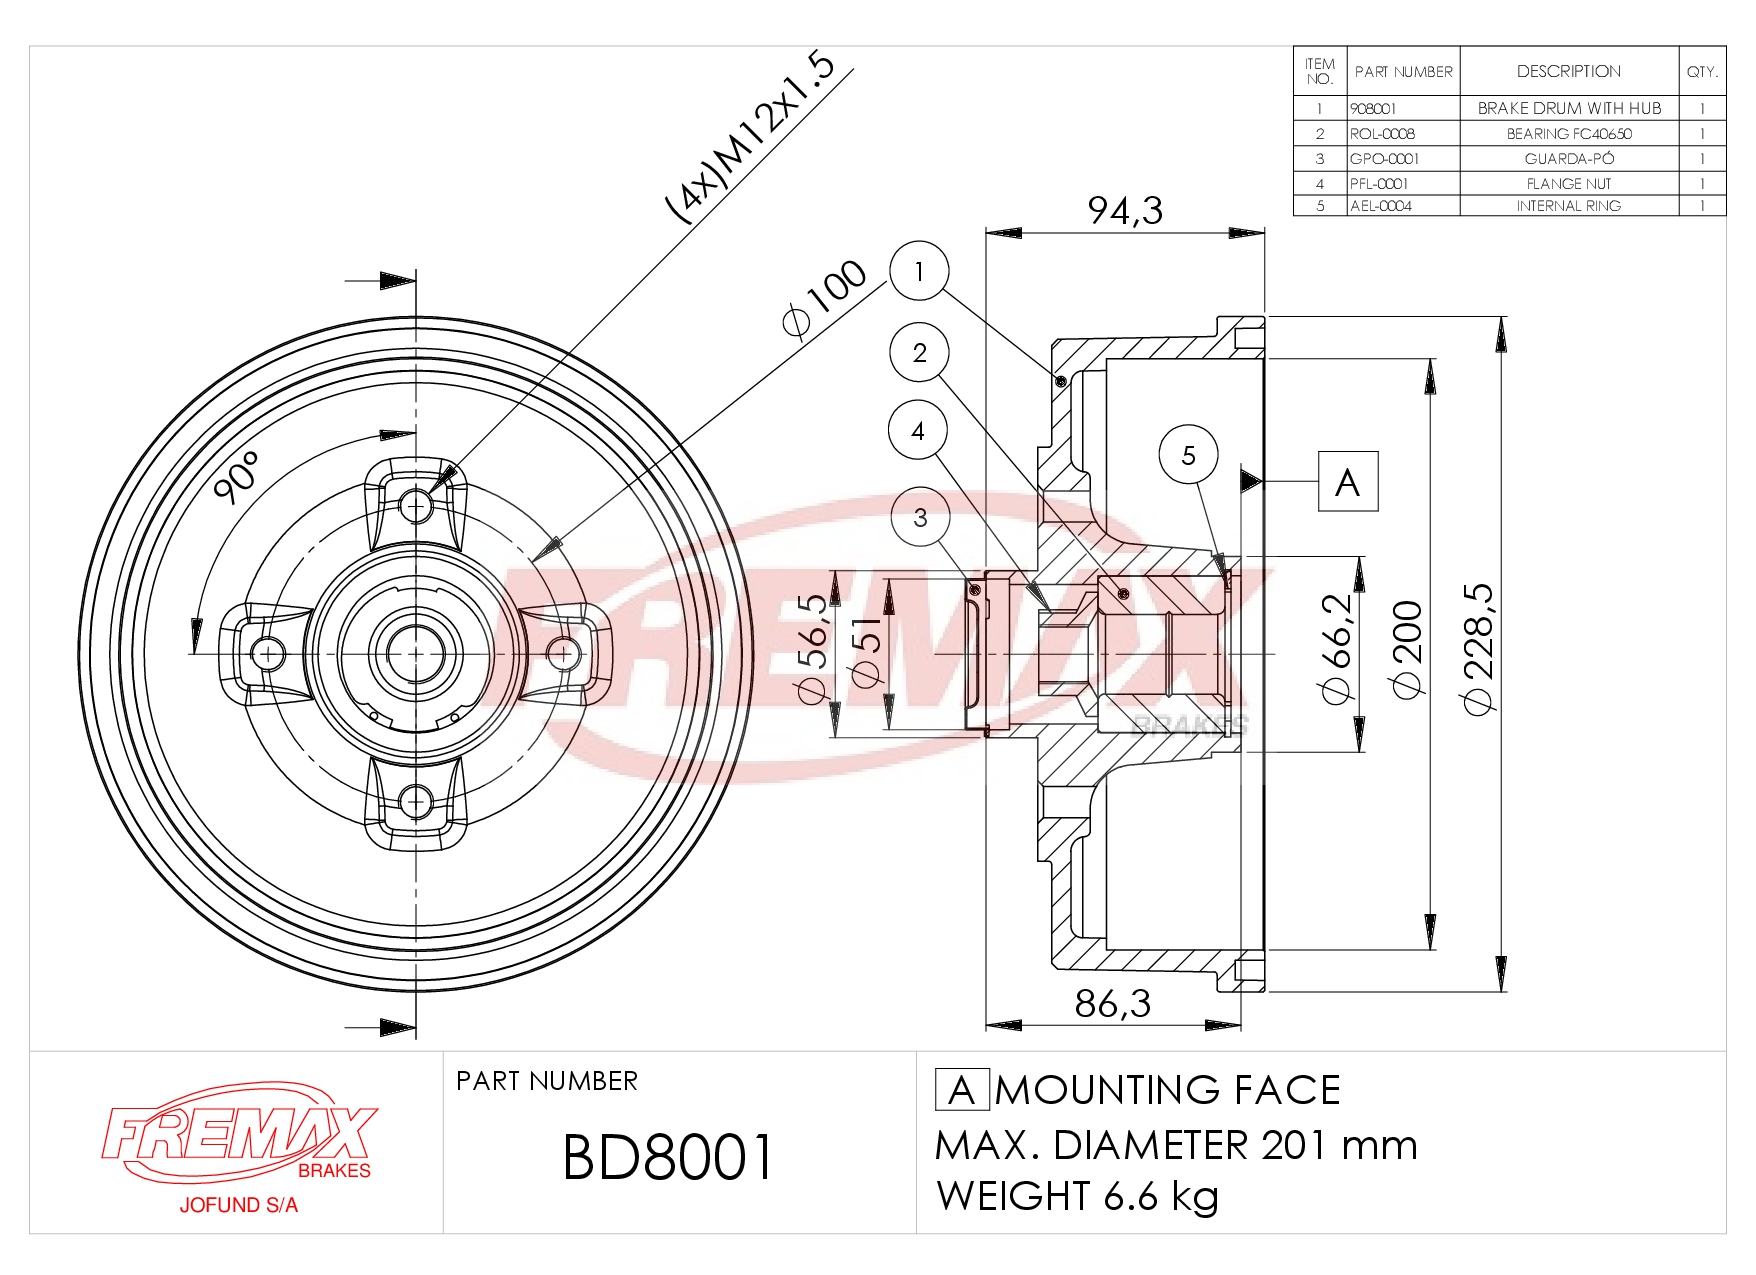 Image de BD-8001  B.DRUM HC WITH BEARING - COMPONENTS RETAINING RING (1),PROTECTIVE COVER (1),FITTING INSTRUCTION (1),FLANGE NUT (1),BEARING (1)